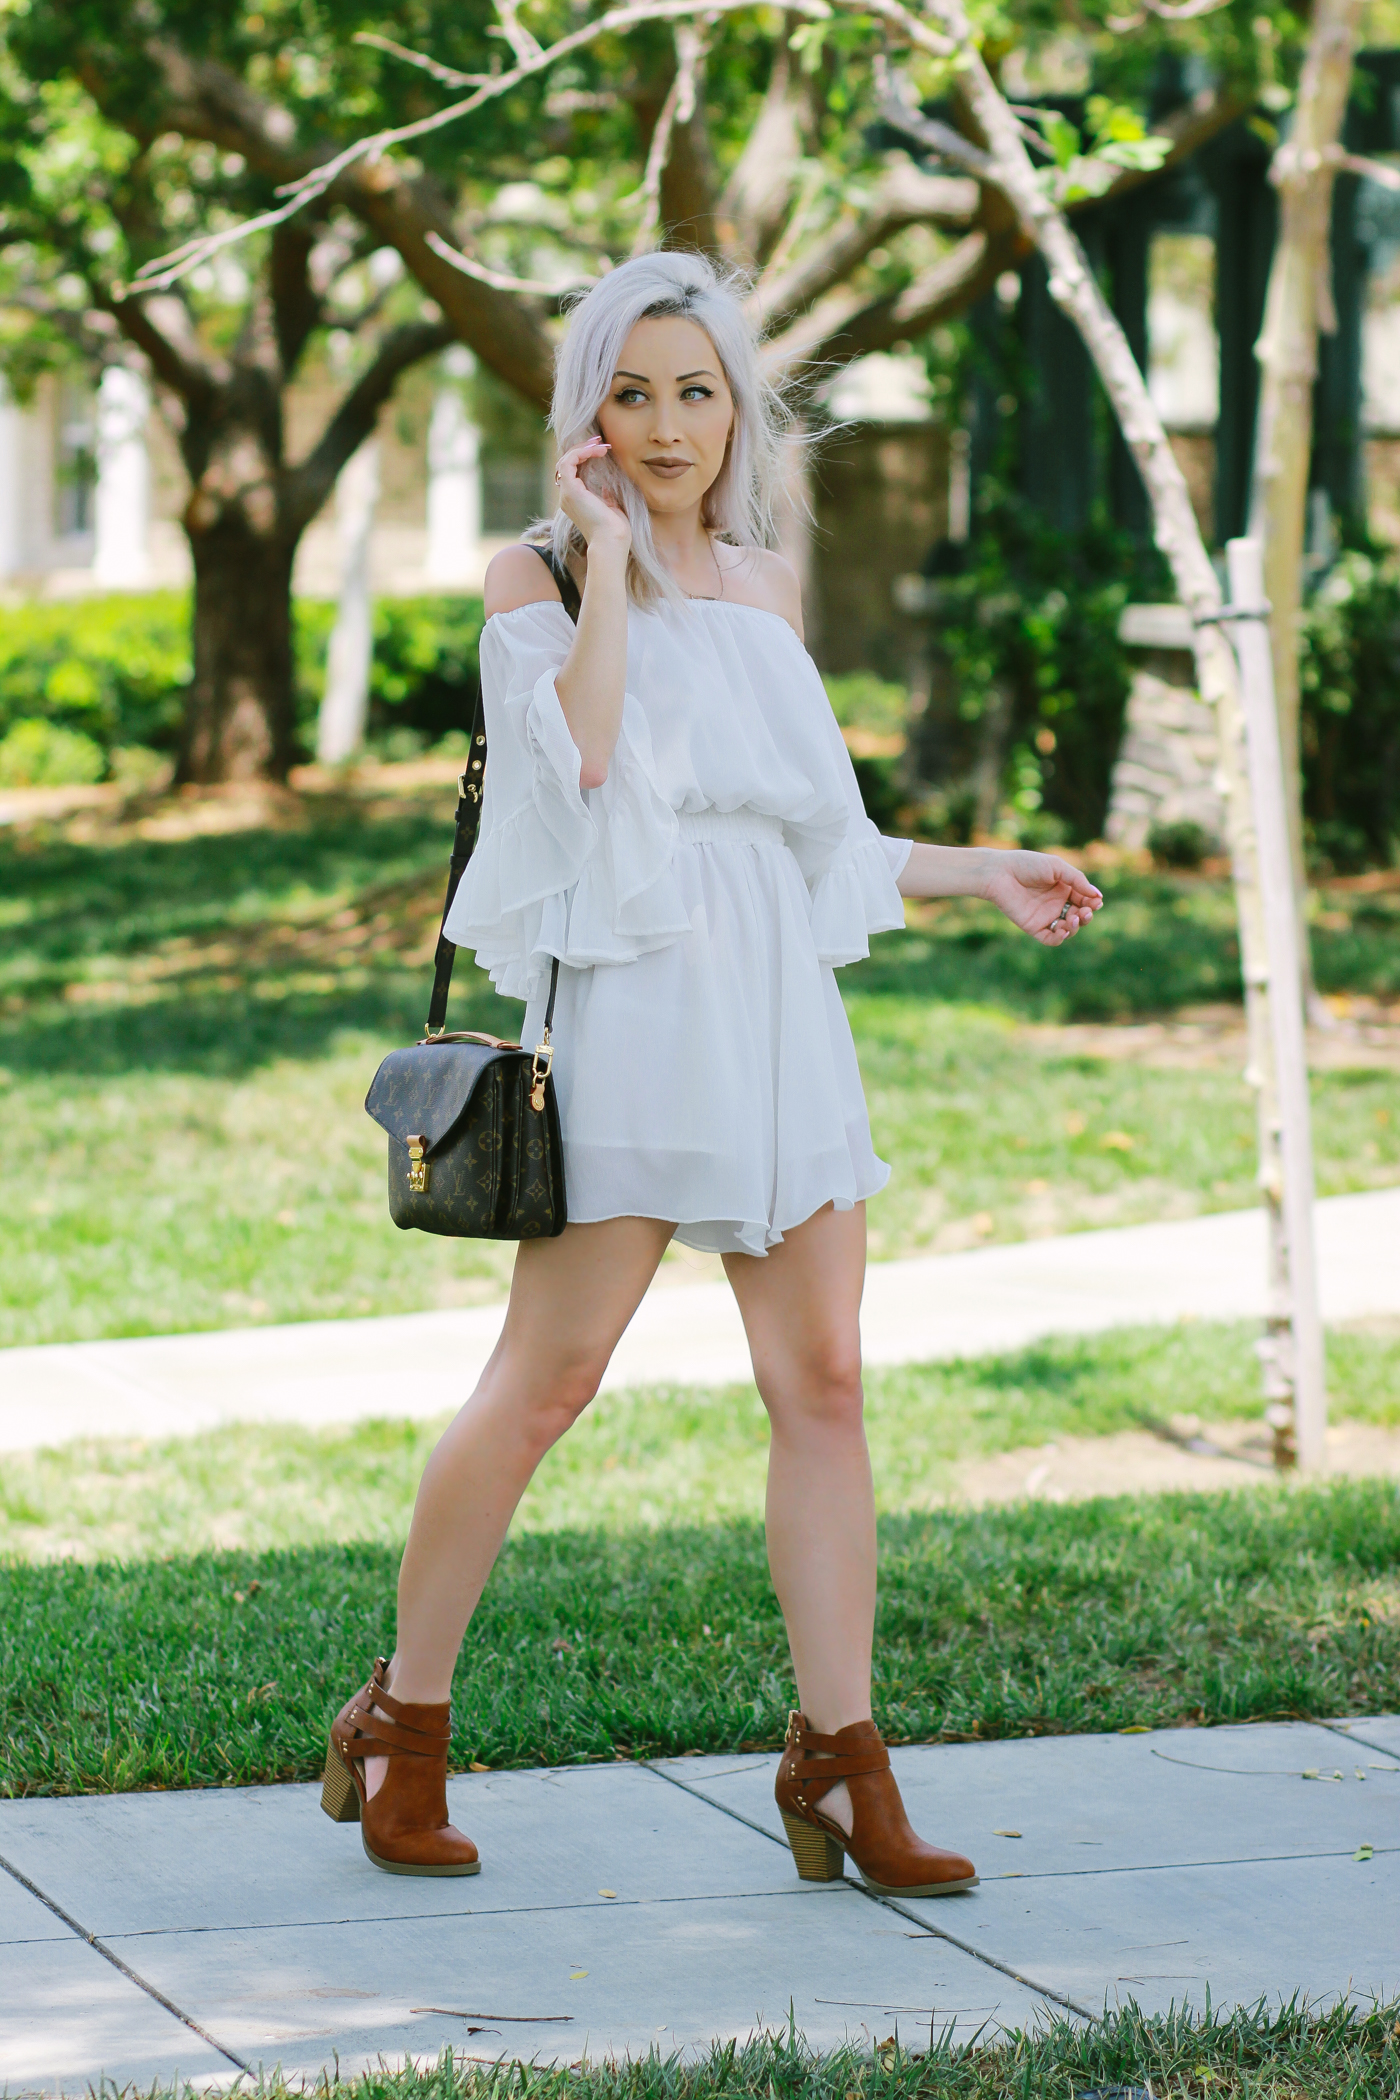 Blondie in the City | White Chiffon romper/playsuit from @chicwish | Brown Booties from @shoedazzle | Summer #OOTD